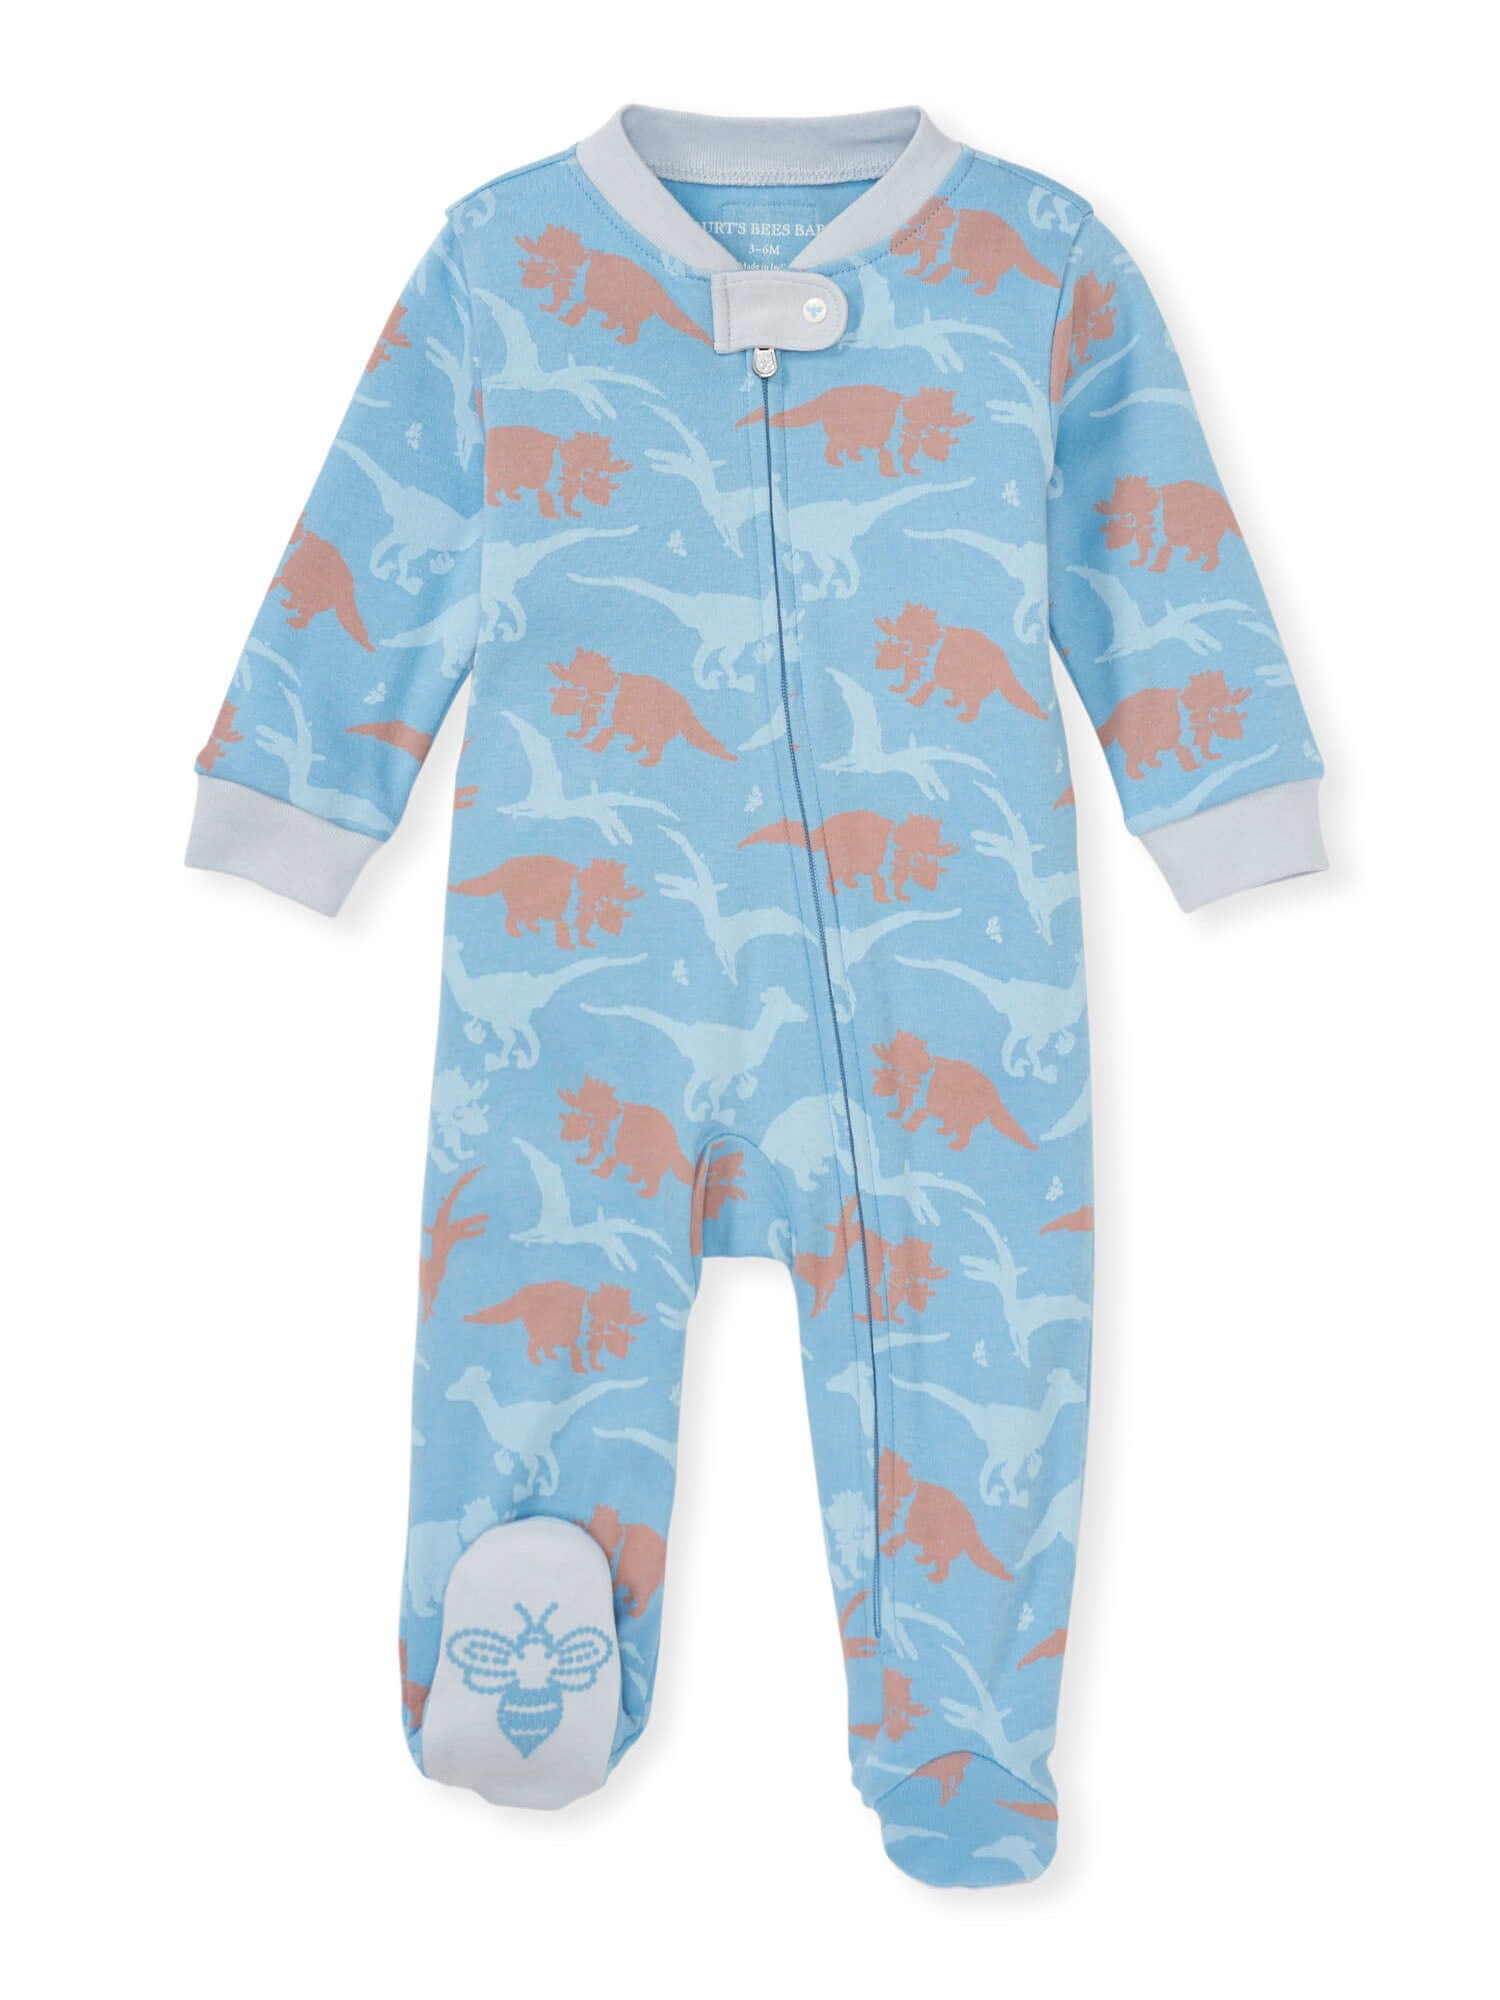 100% Organic Cotton One-Piece Romper Jumpsuit Zip Front Pajamas Burts Bees Baby Baby Boys Sleep and Play Pjs 